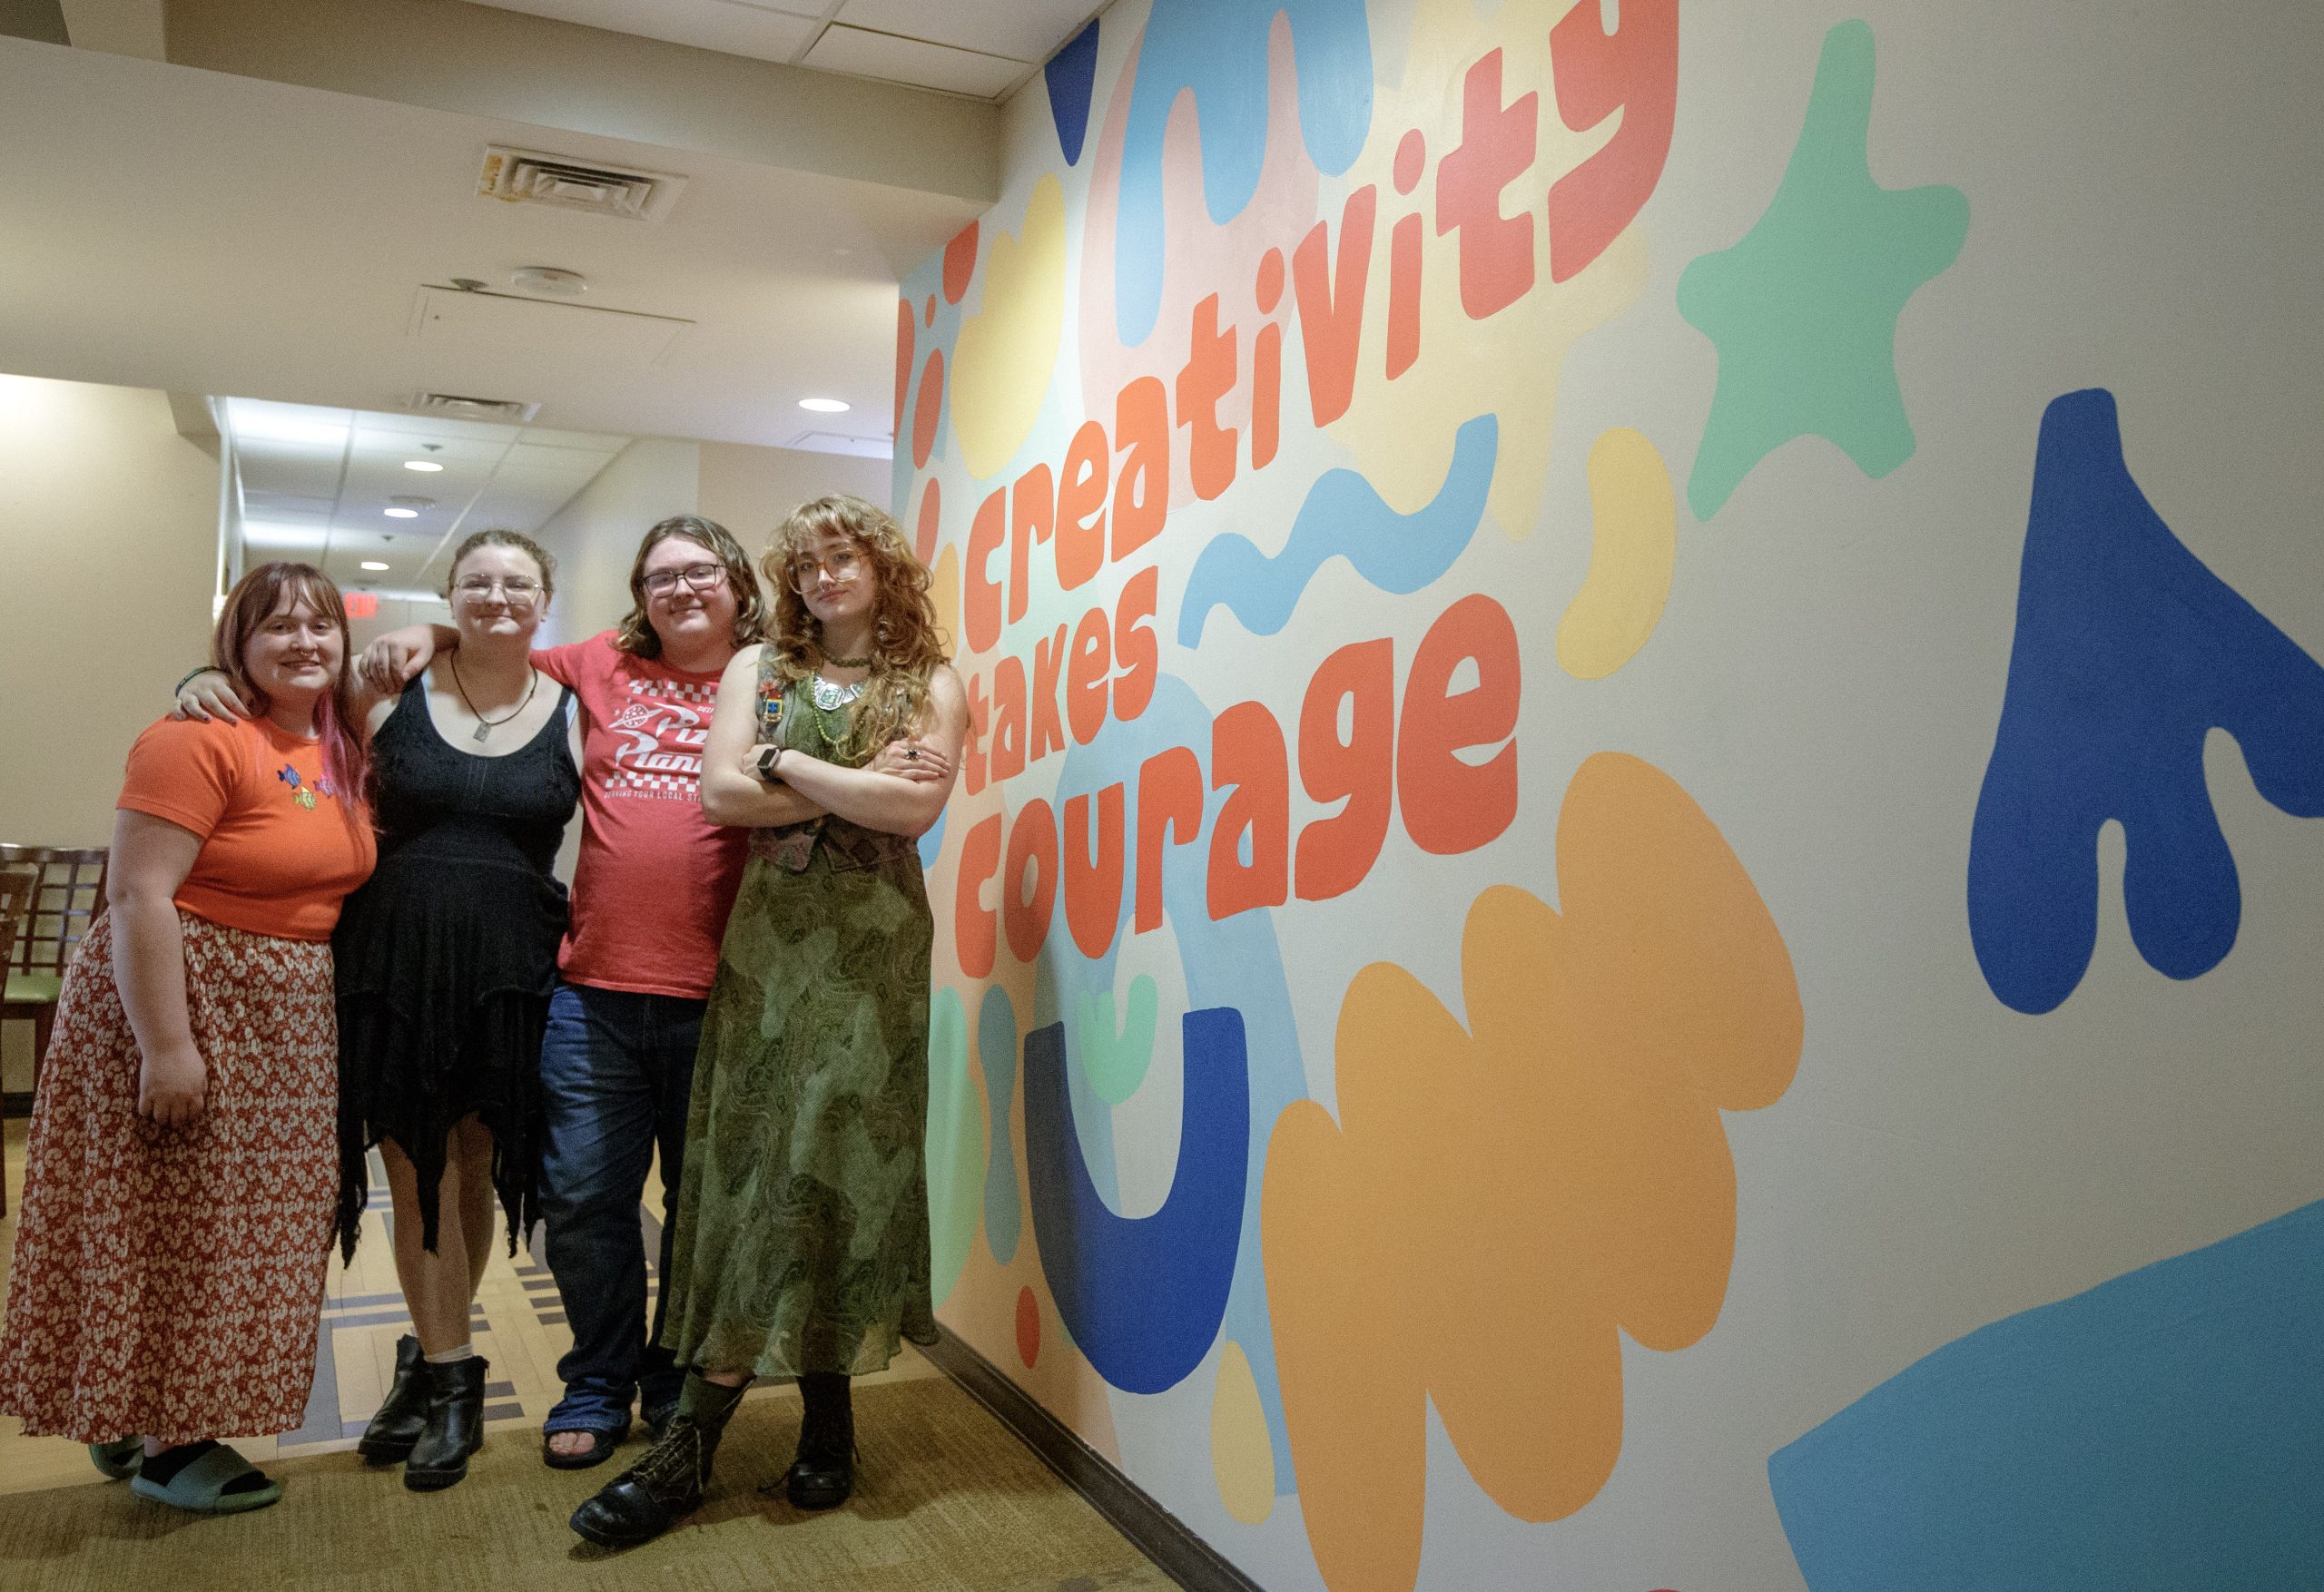 Art students show off an inspirational mural they painted in the West Hall. Photo by Ren Miller.